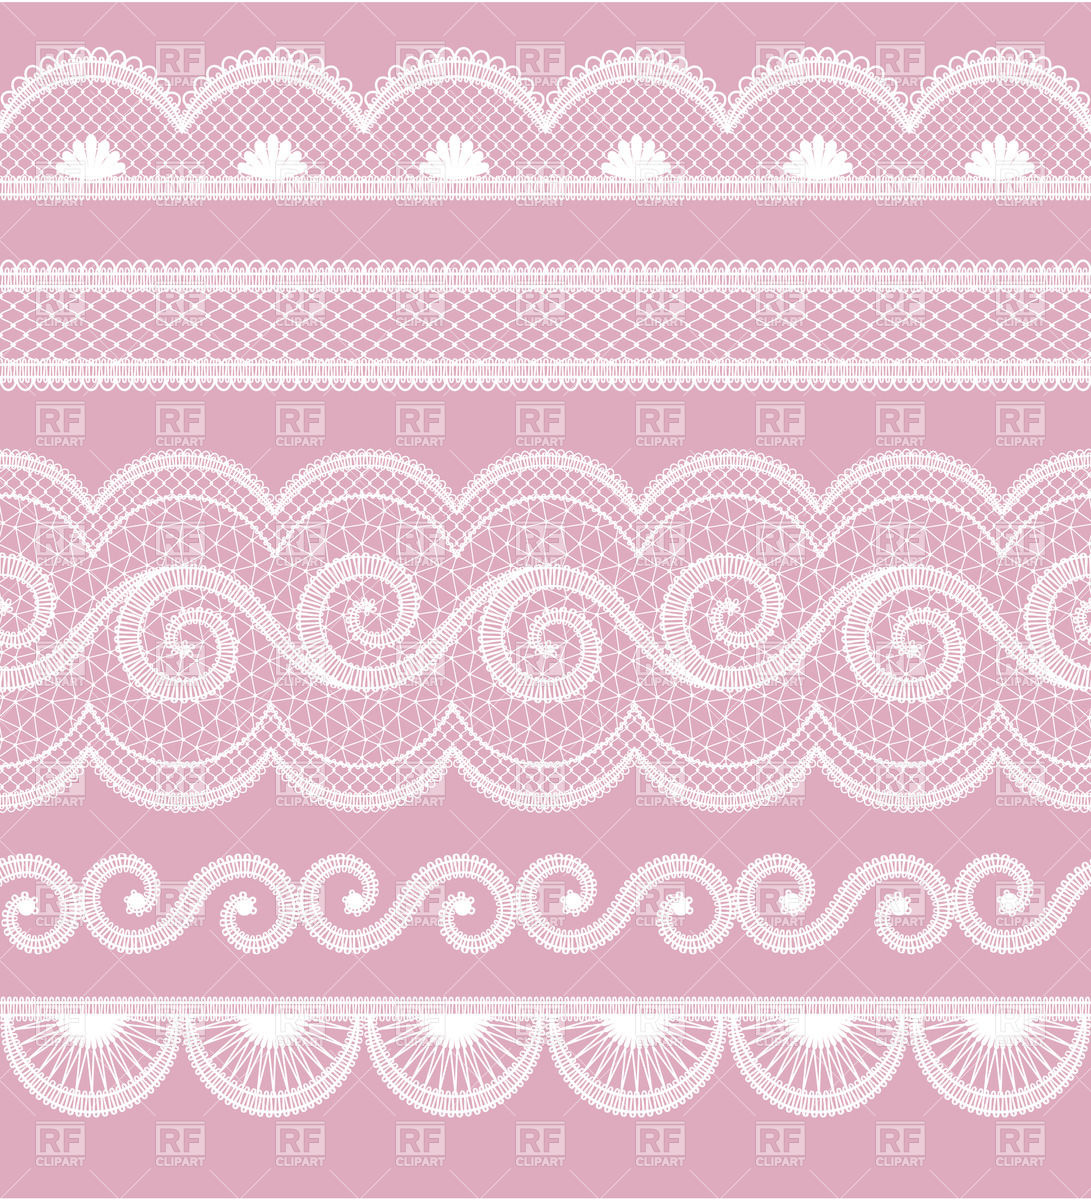 Download White Lace Border Vector at Vectorified.com | Collection ...